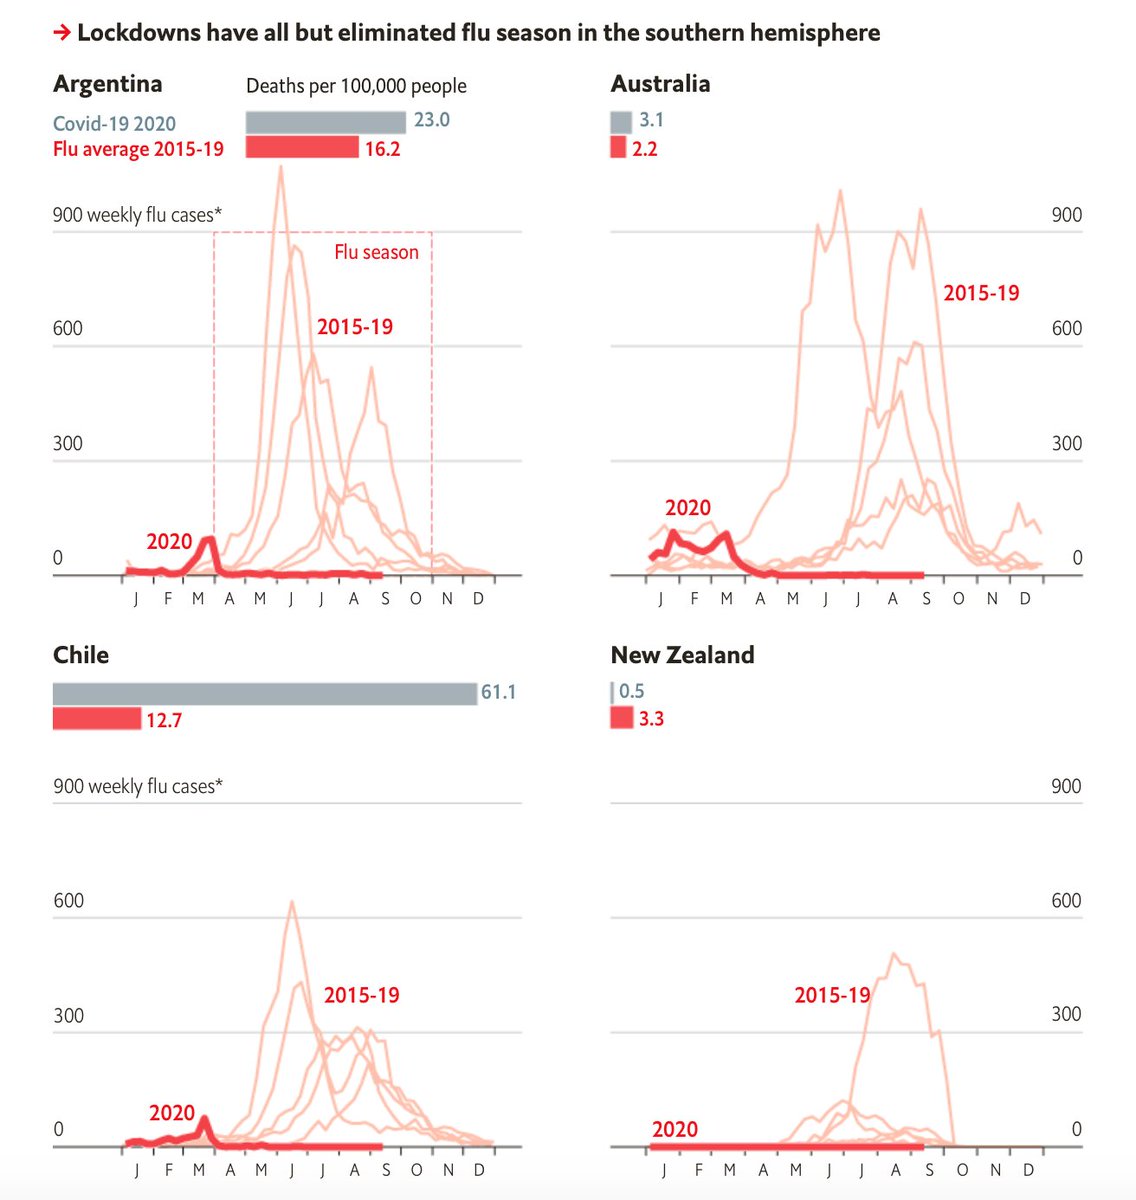 Good news: virtual elimination of a flu season in the southern hemisphere for 2020 economist.com/graphic-detail… @TheEconomist